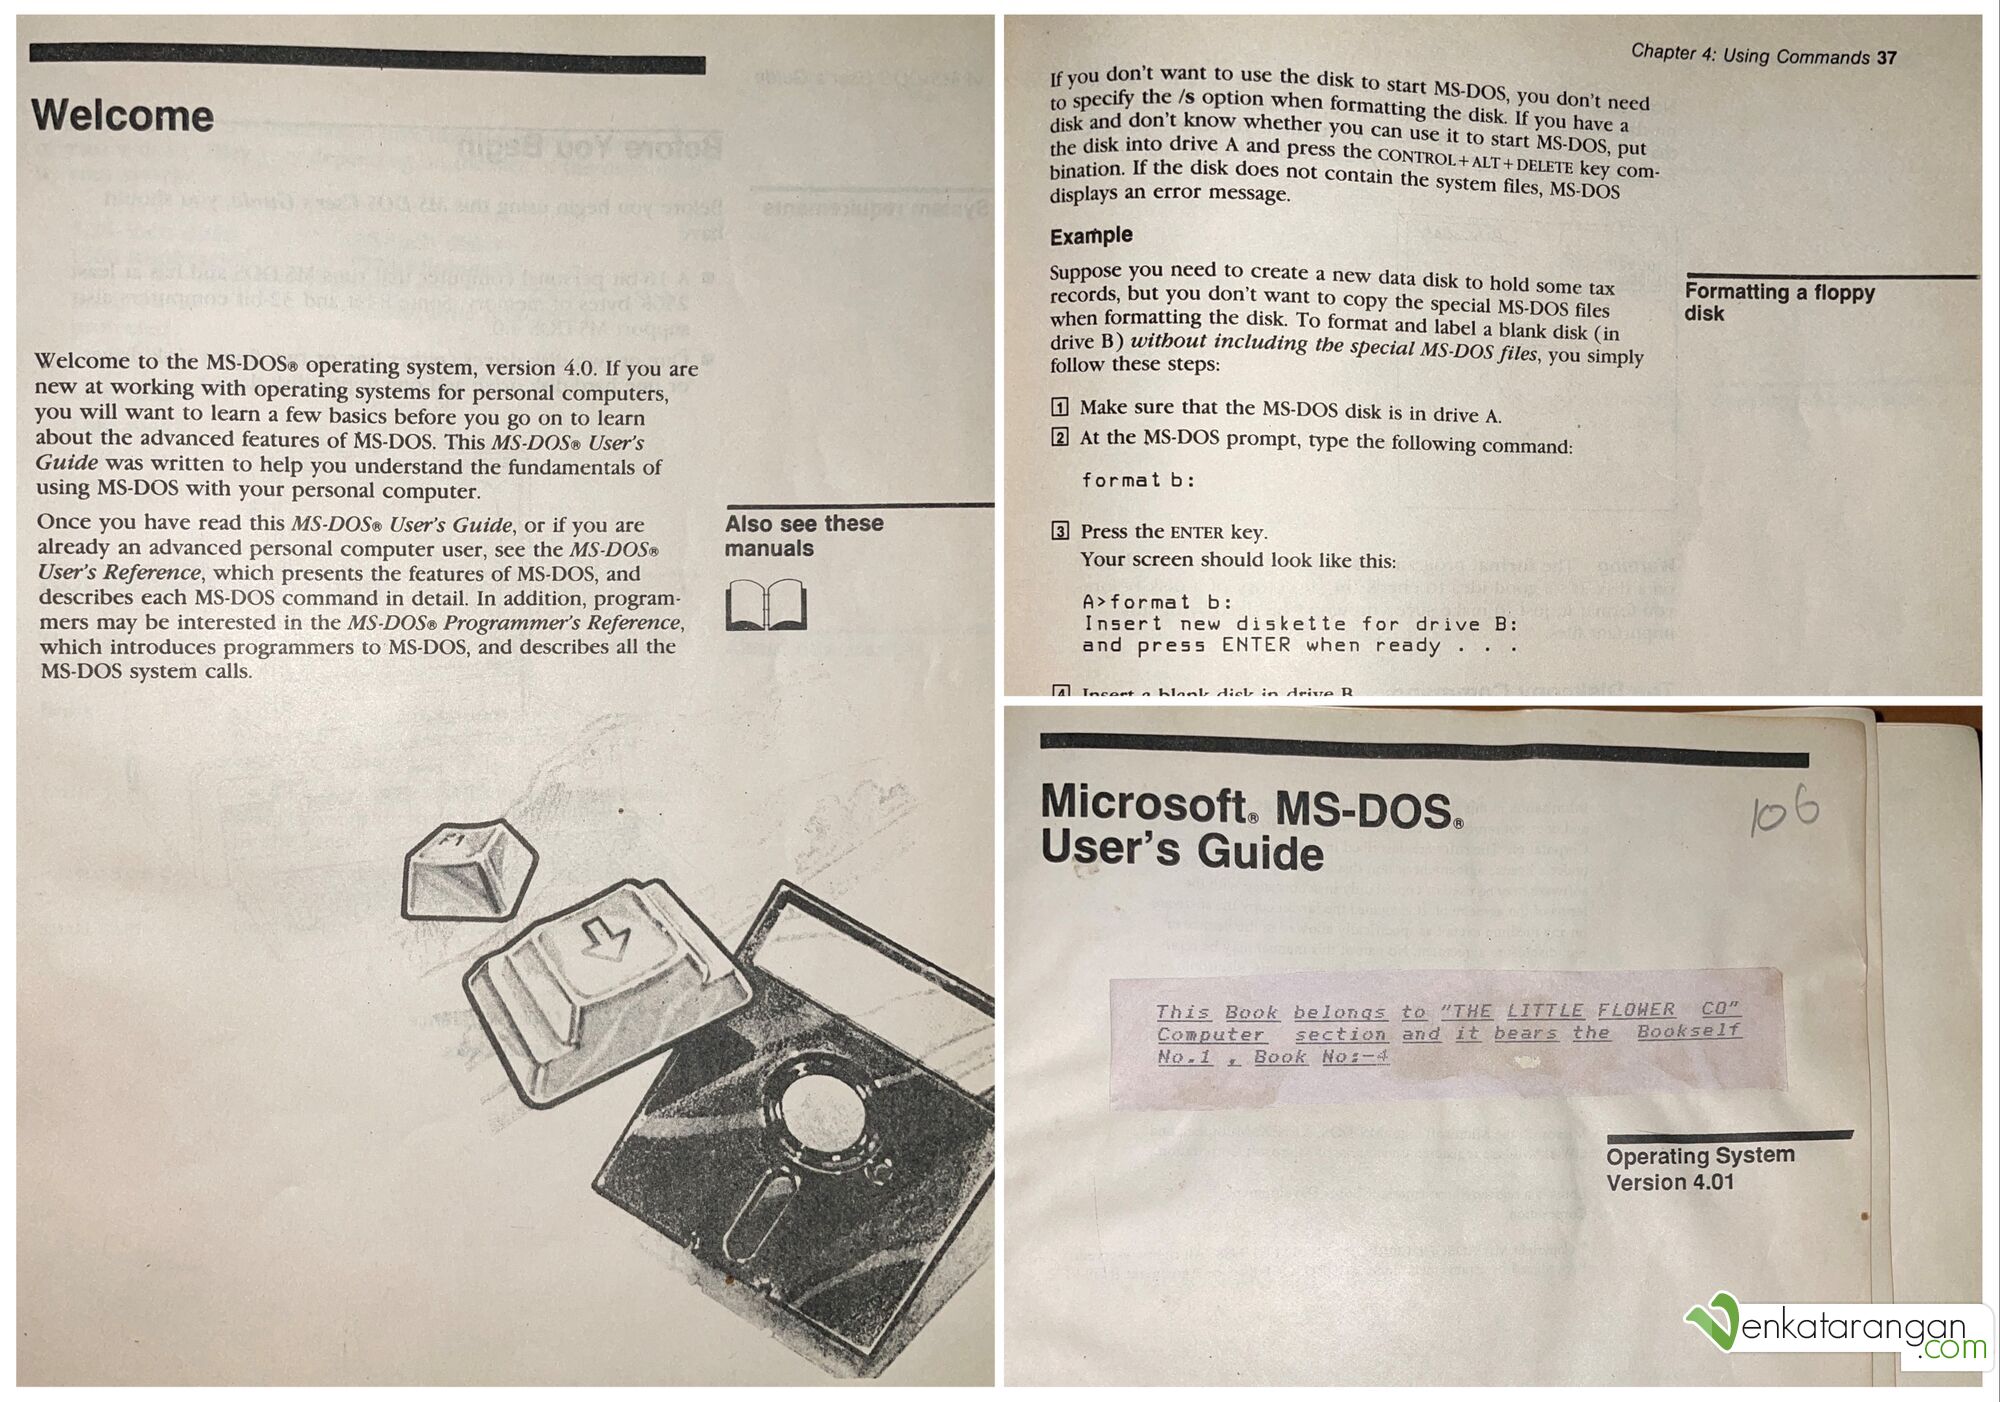 Microsoft MS-DOS User's Guide (Manual) for Operating system Version 4.01